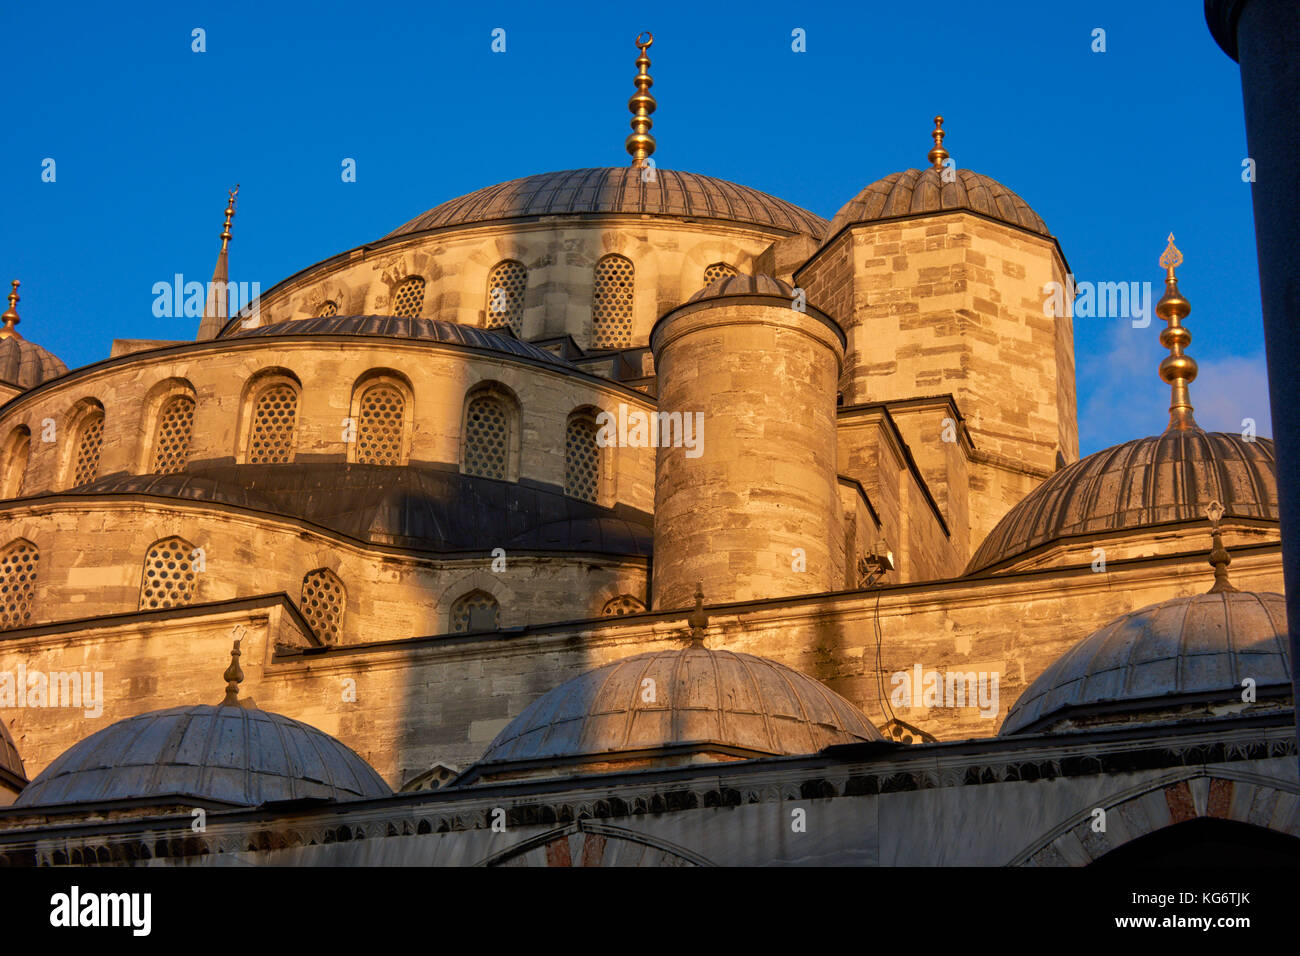 Exterior view of the Sultan Ahmed Mosque (Blue Mosque) at sunset. Istanbul. Turkey. Stock Photo